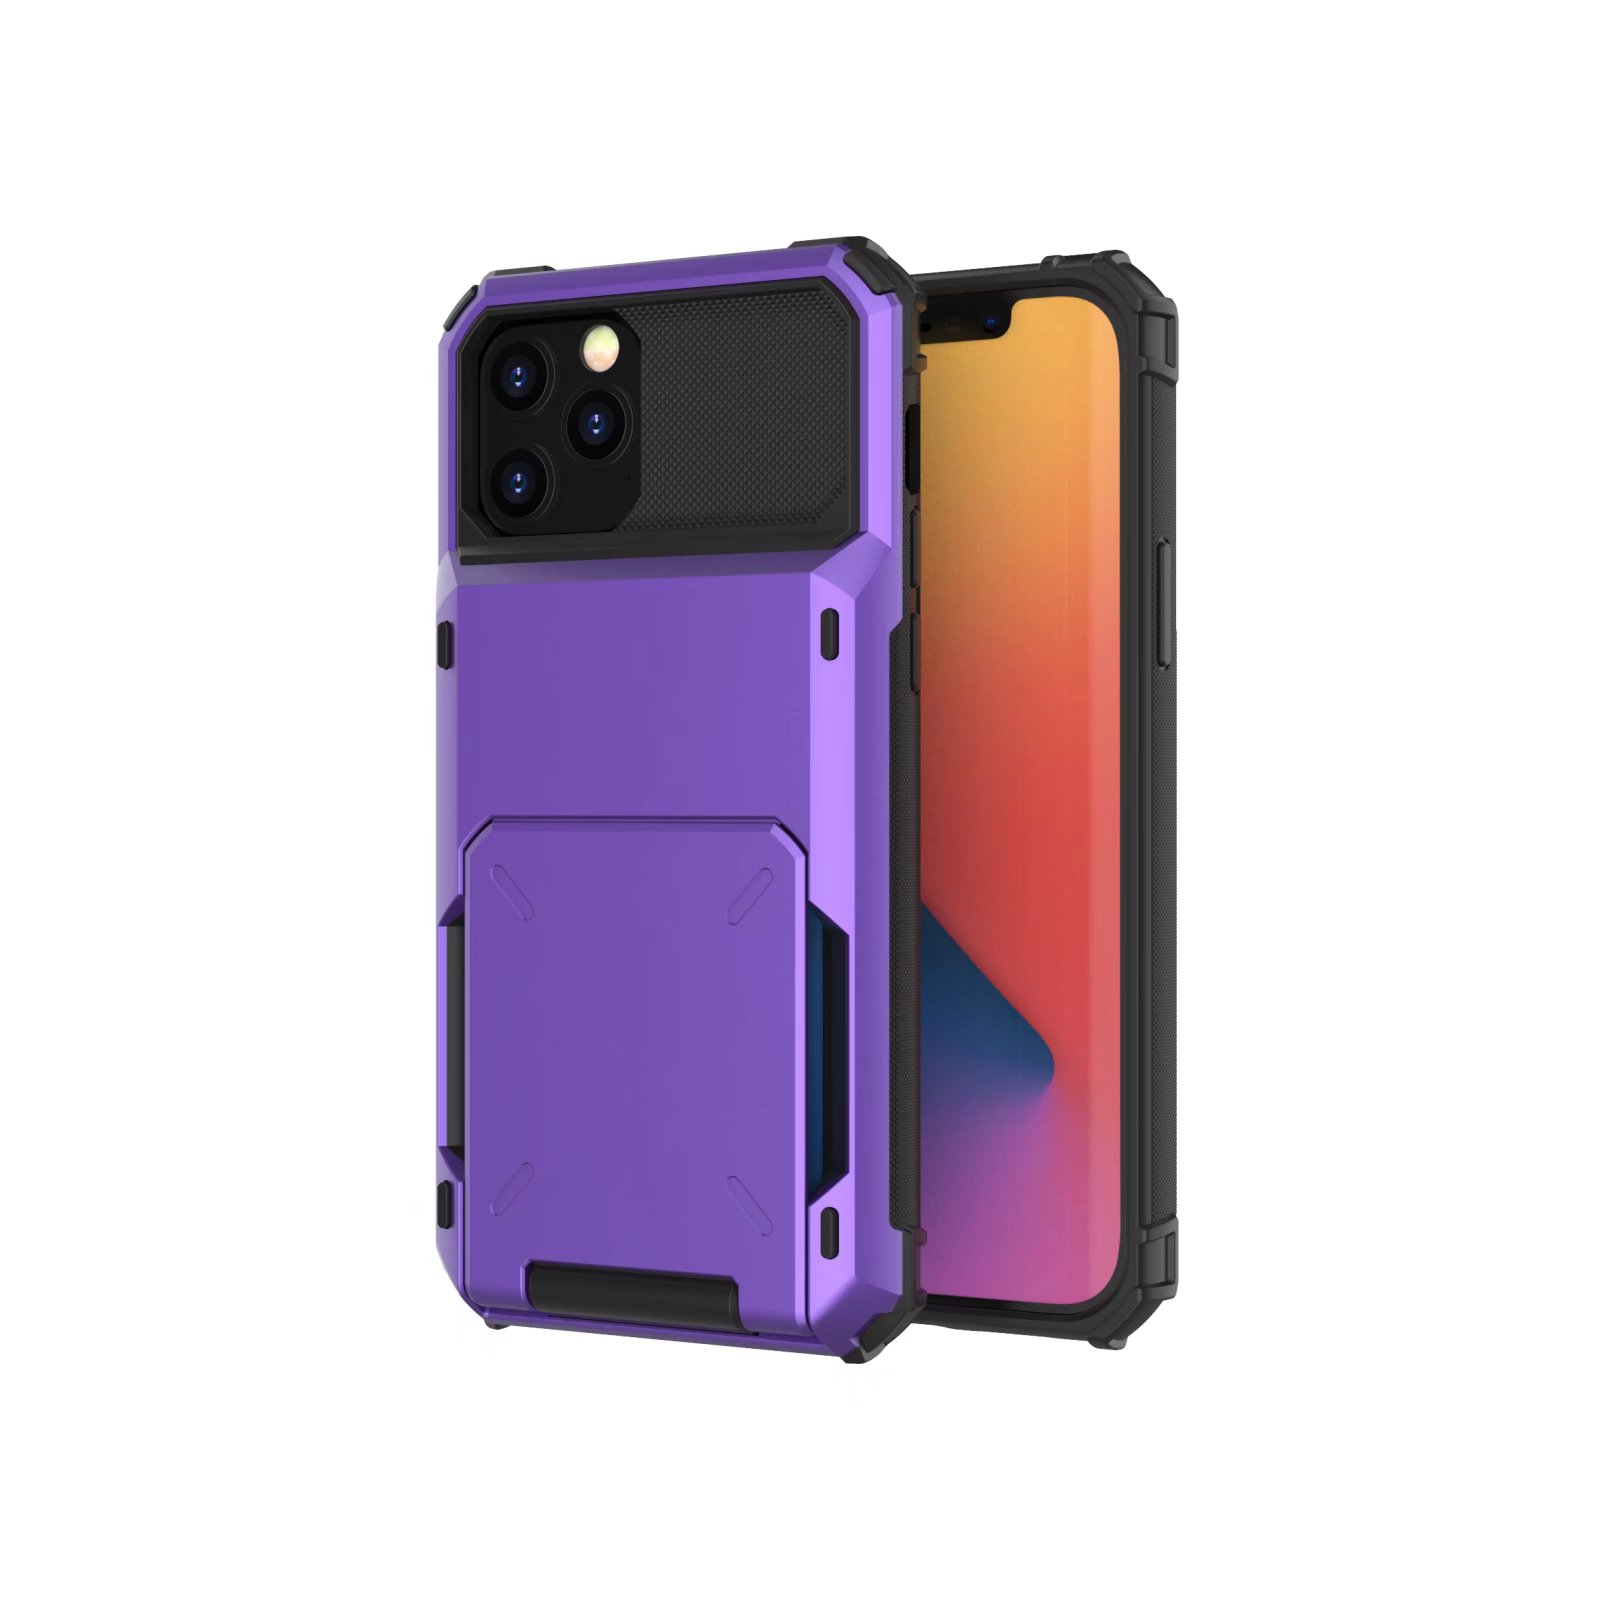 iPhone 13 Pro Max Back Cover Hoesje - Pasjeshouder - Shockproof - TPU - Hardcase - iPhone 13 Pro Max - Paars